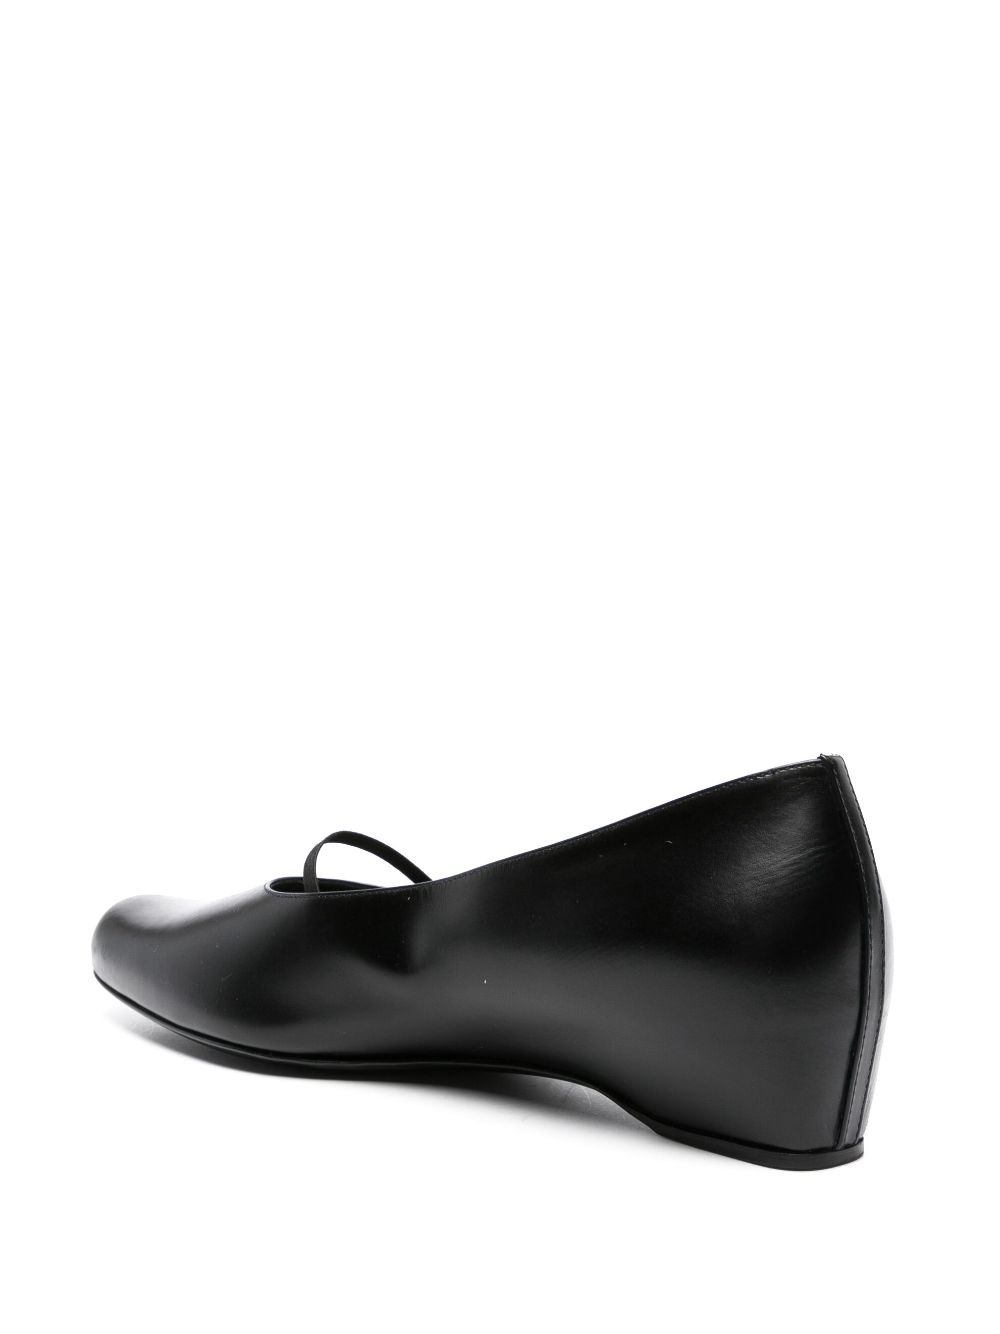 Marion leather ballerina shoes - 3